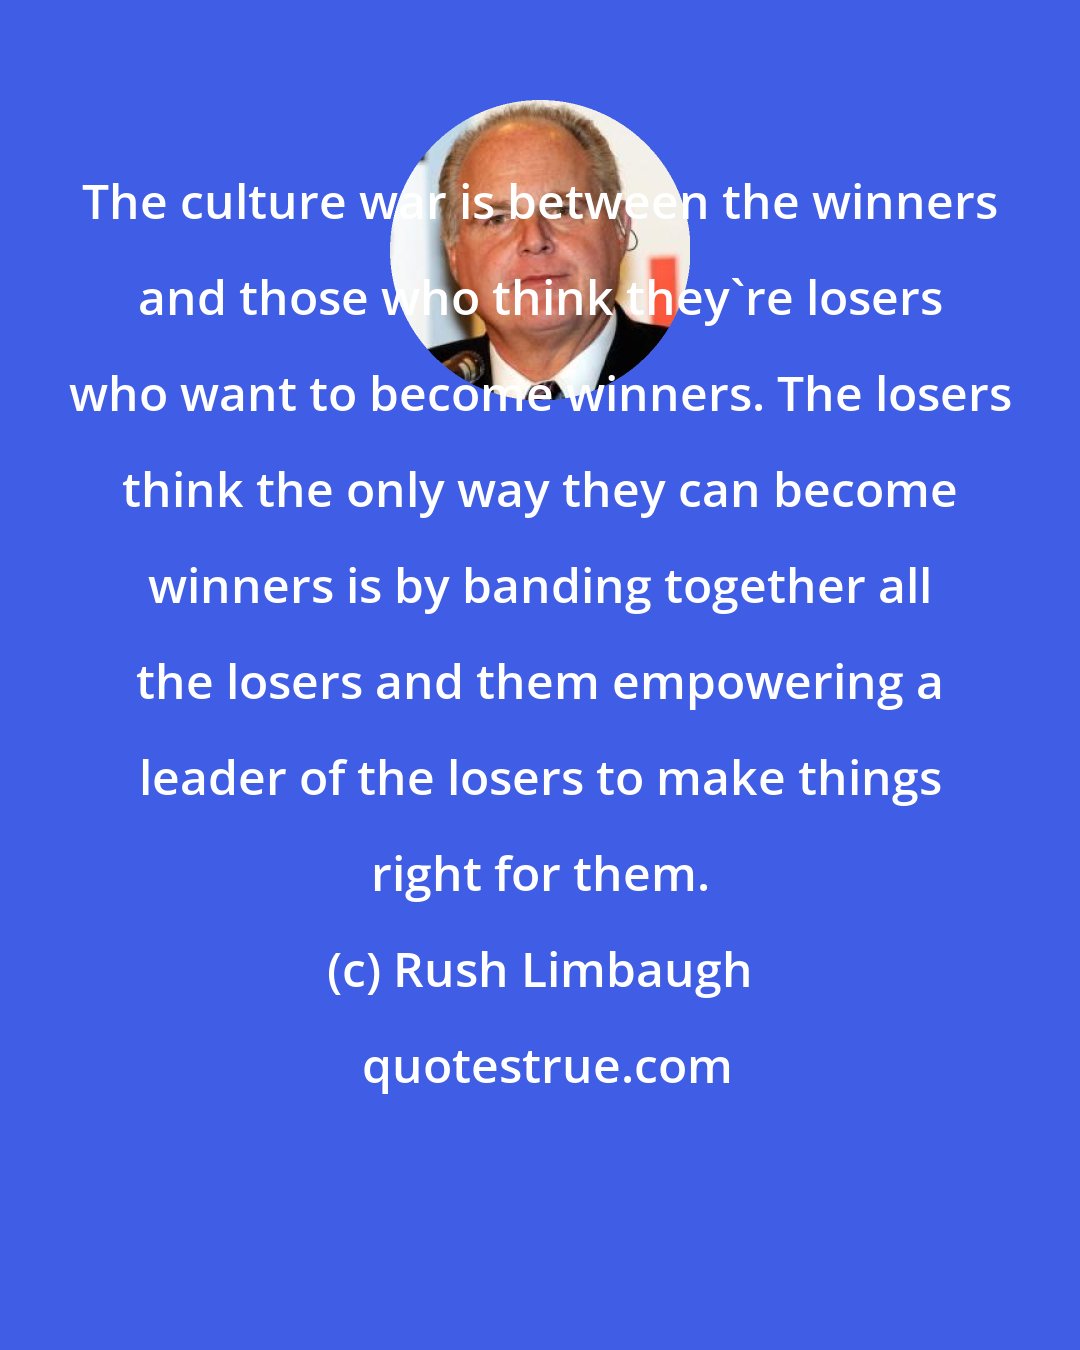 Rush Limbaugh: The culture war is between the winners and those who think they're losers who want to become winners. The losers think the only way they can become winners is by banding together all the losers and them empowering a leader of the losers to make things right for them.